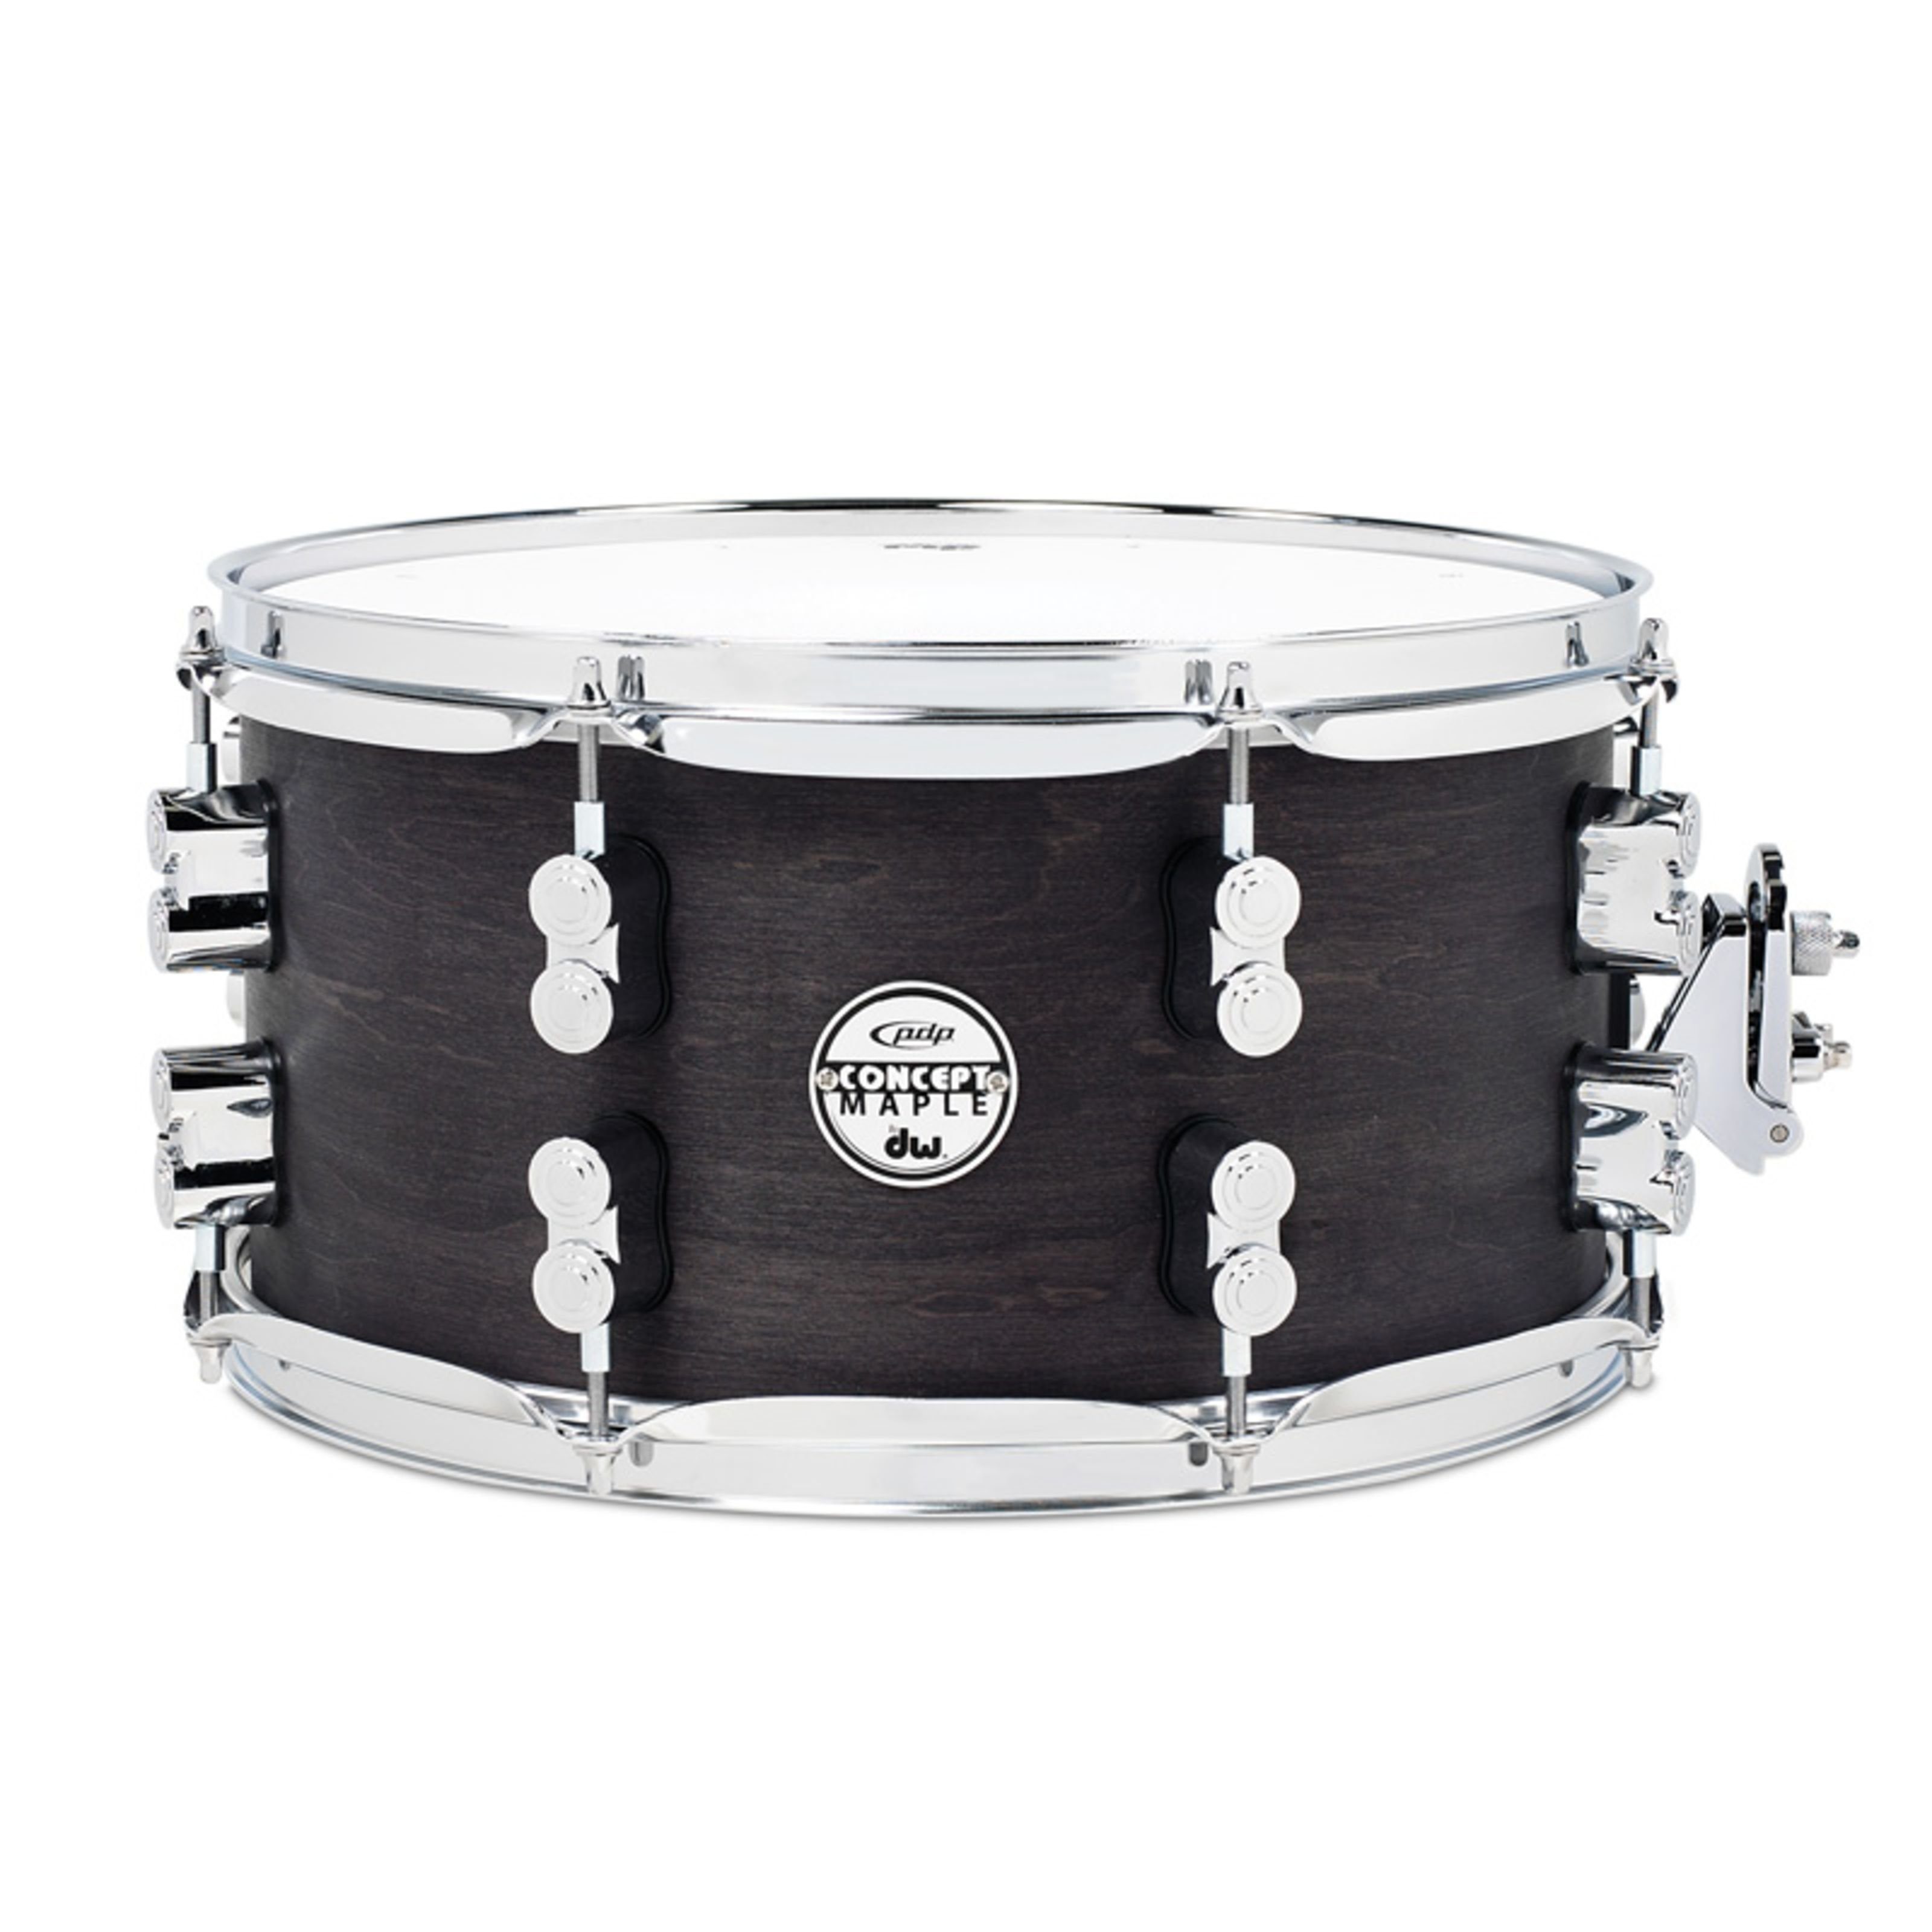 pdp Snare Drum,Black Wax Snare 13"x7", Black Wax Snare 13"x7" - Snare Drum